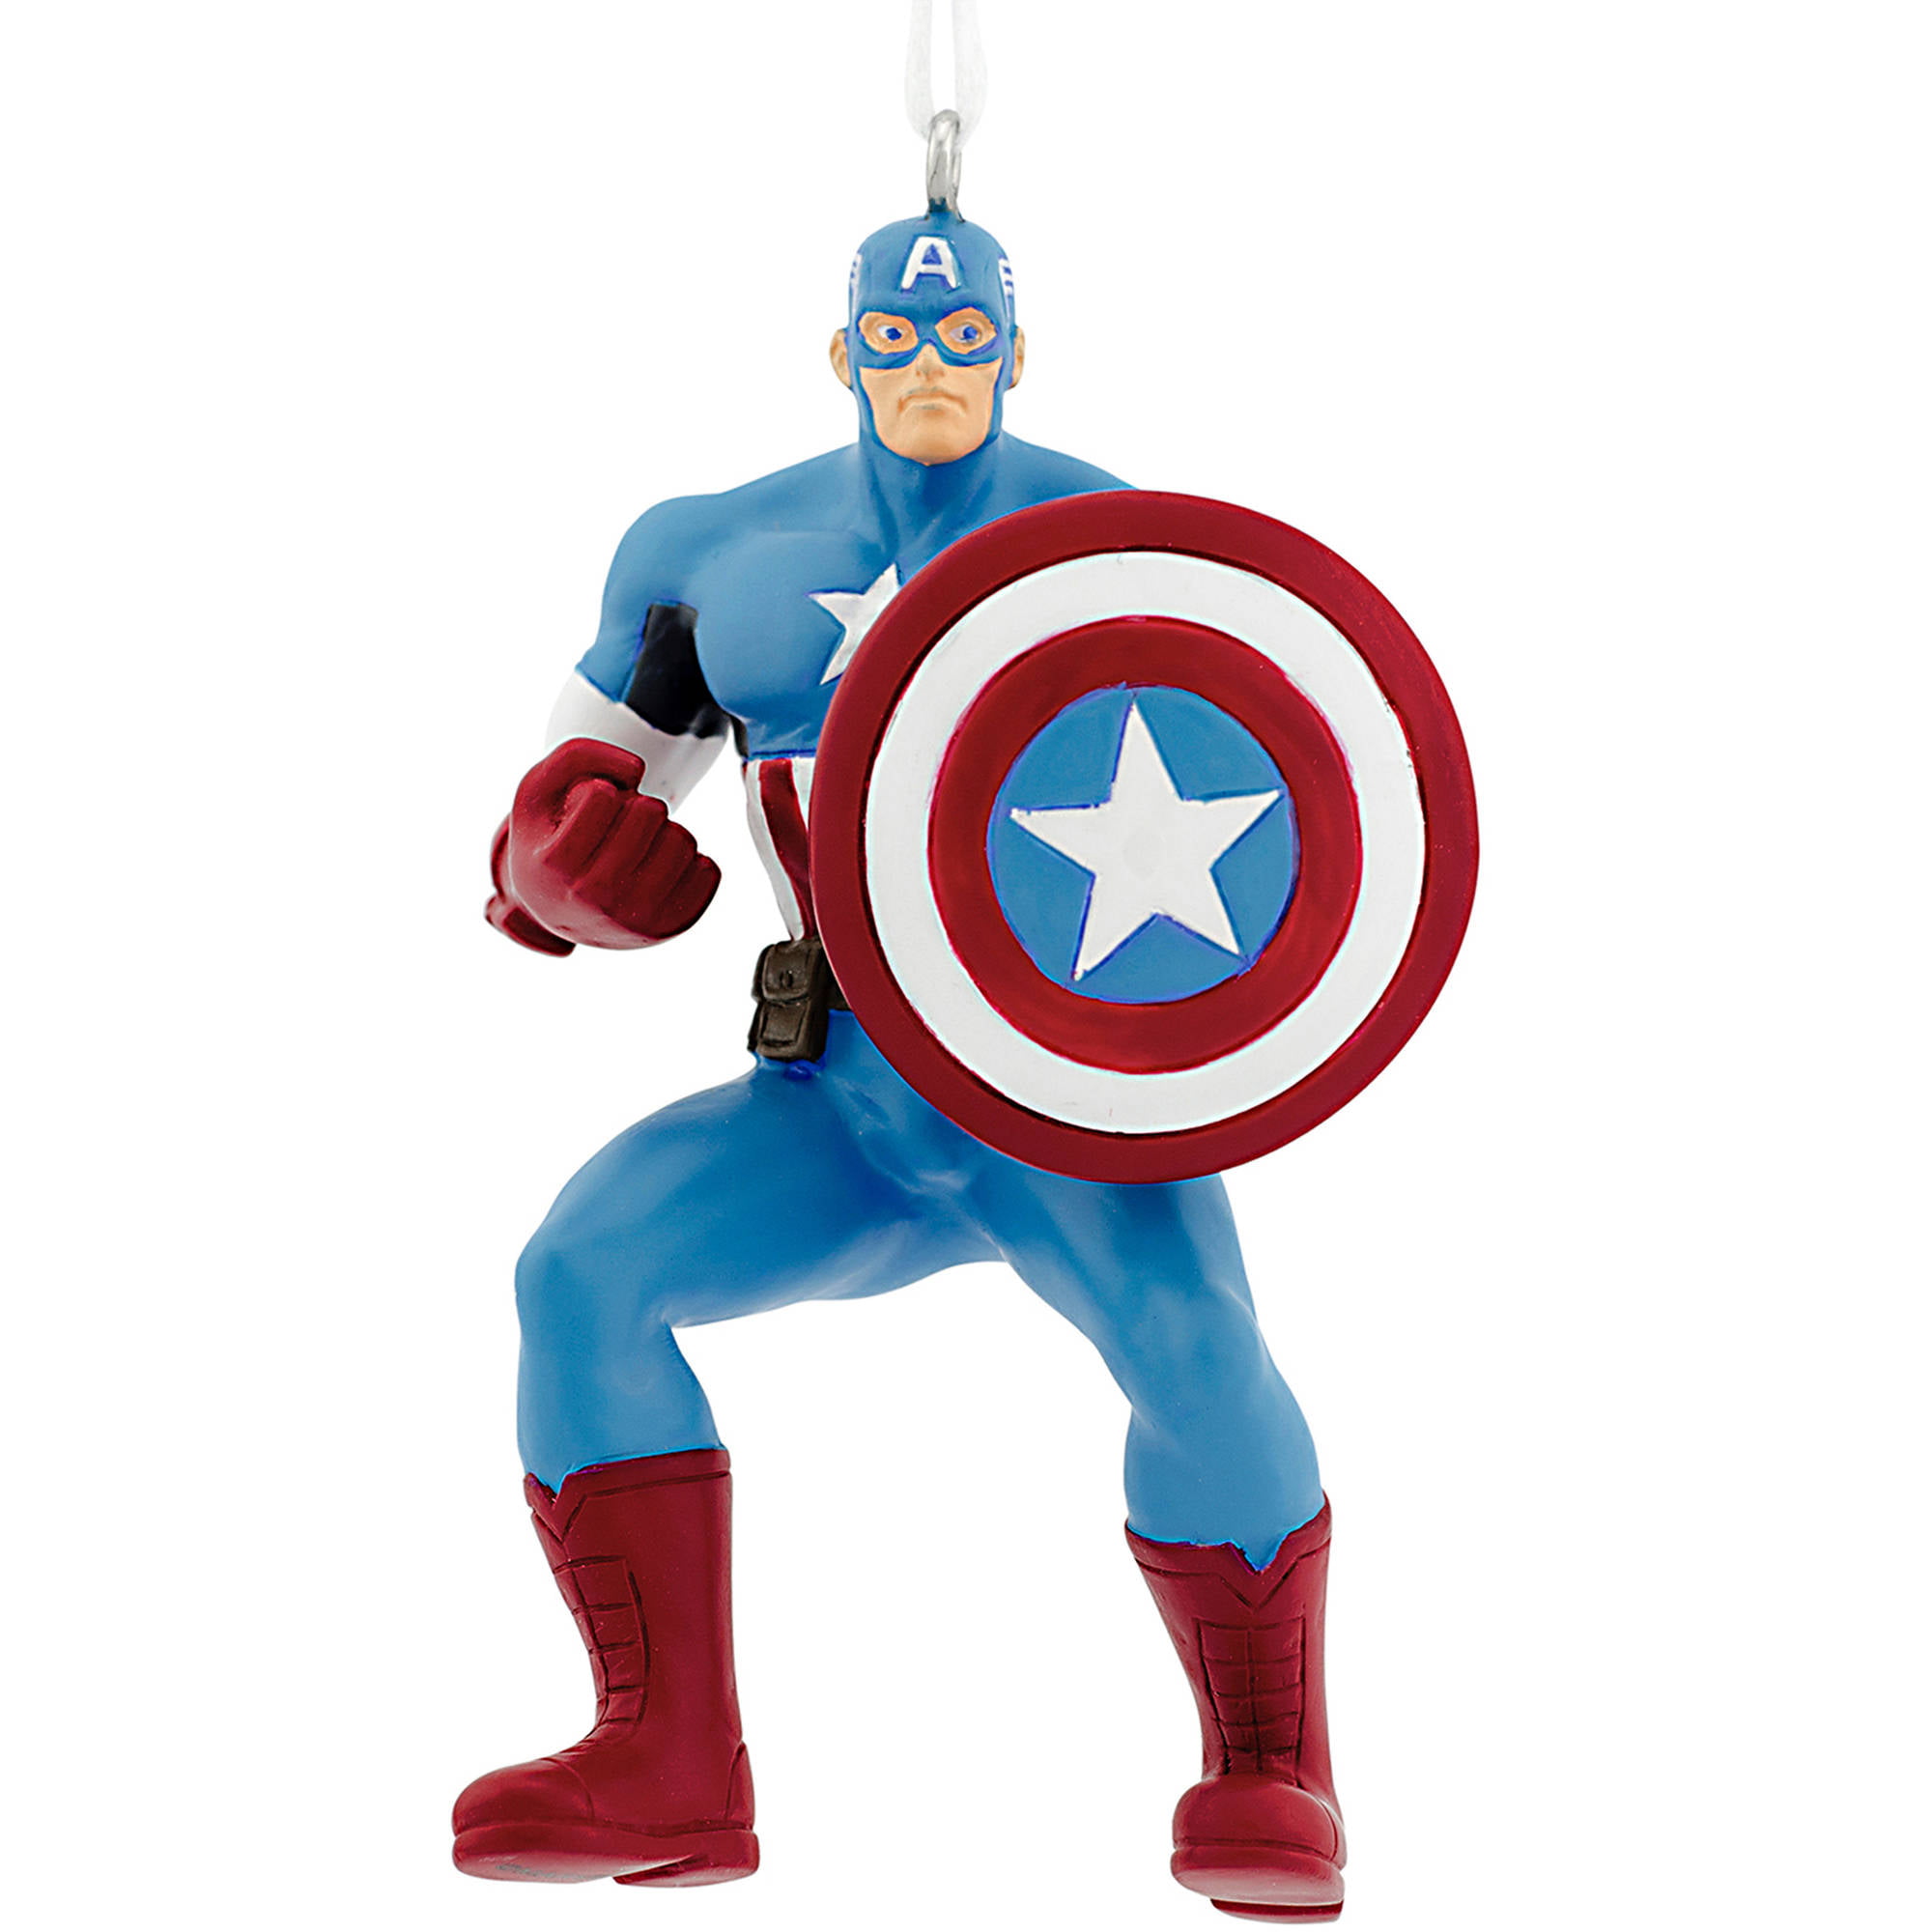 Hallmark Ornament 2011 Captain America and the Avengers Comic Book Heroes